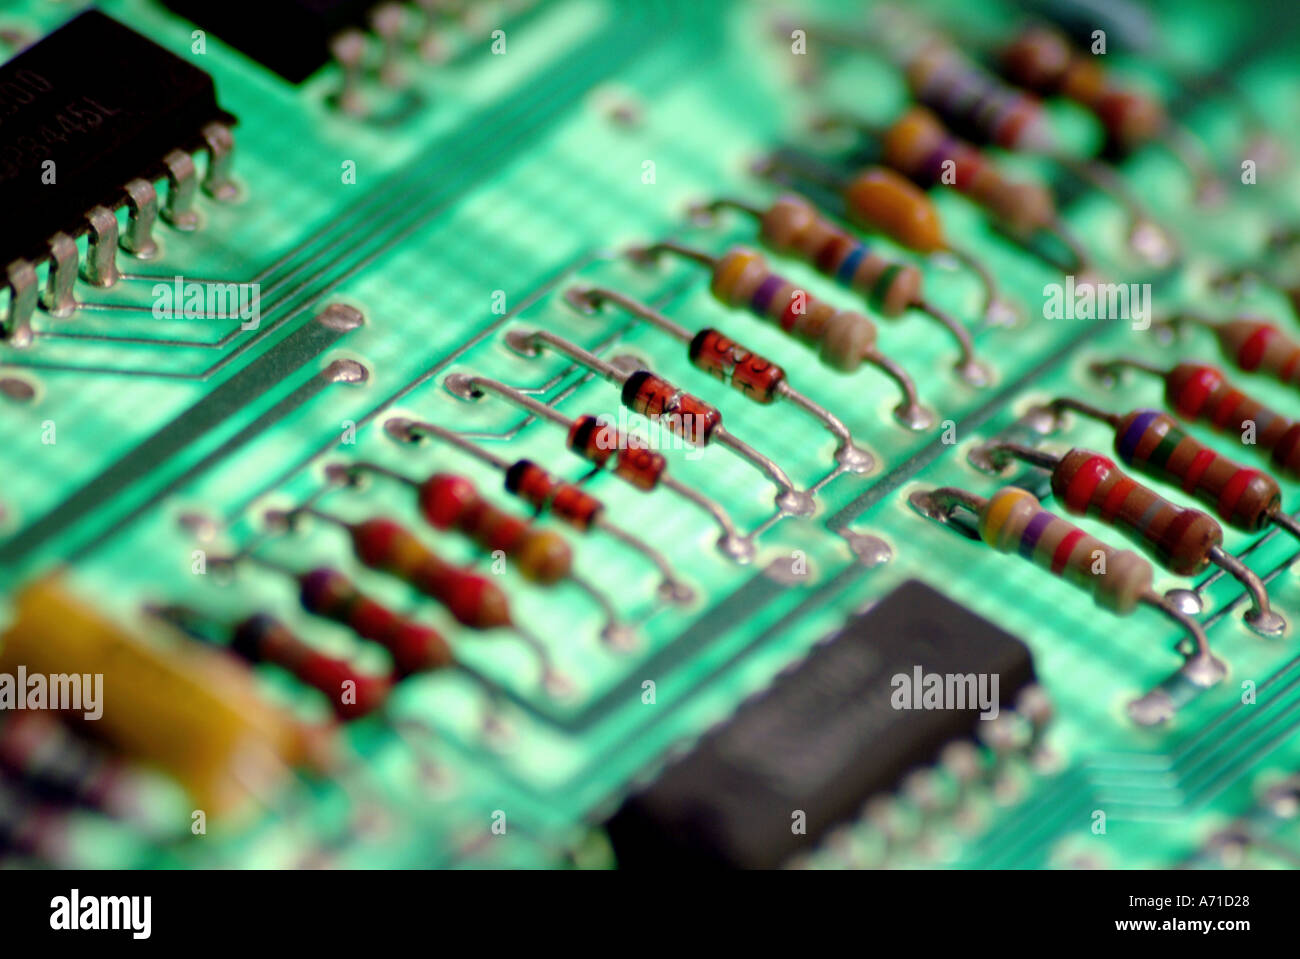 detail of computer printed circuit board Stock Photo